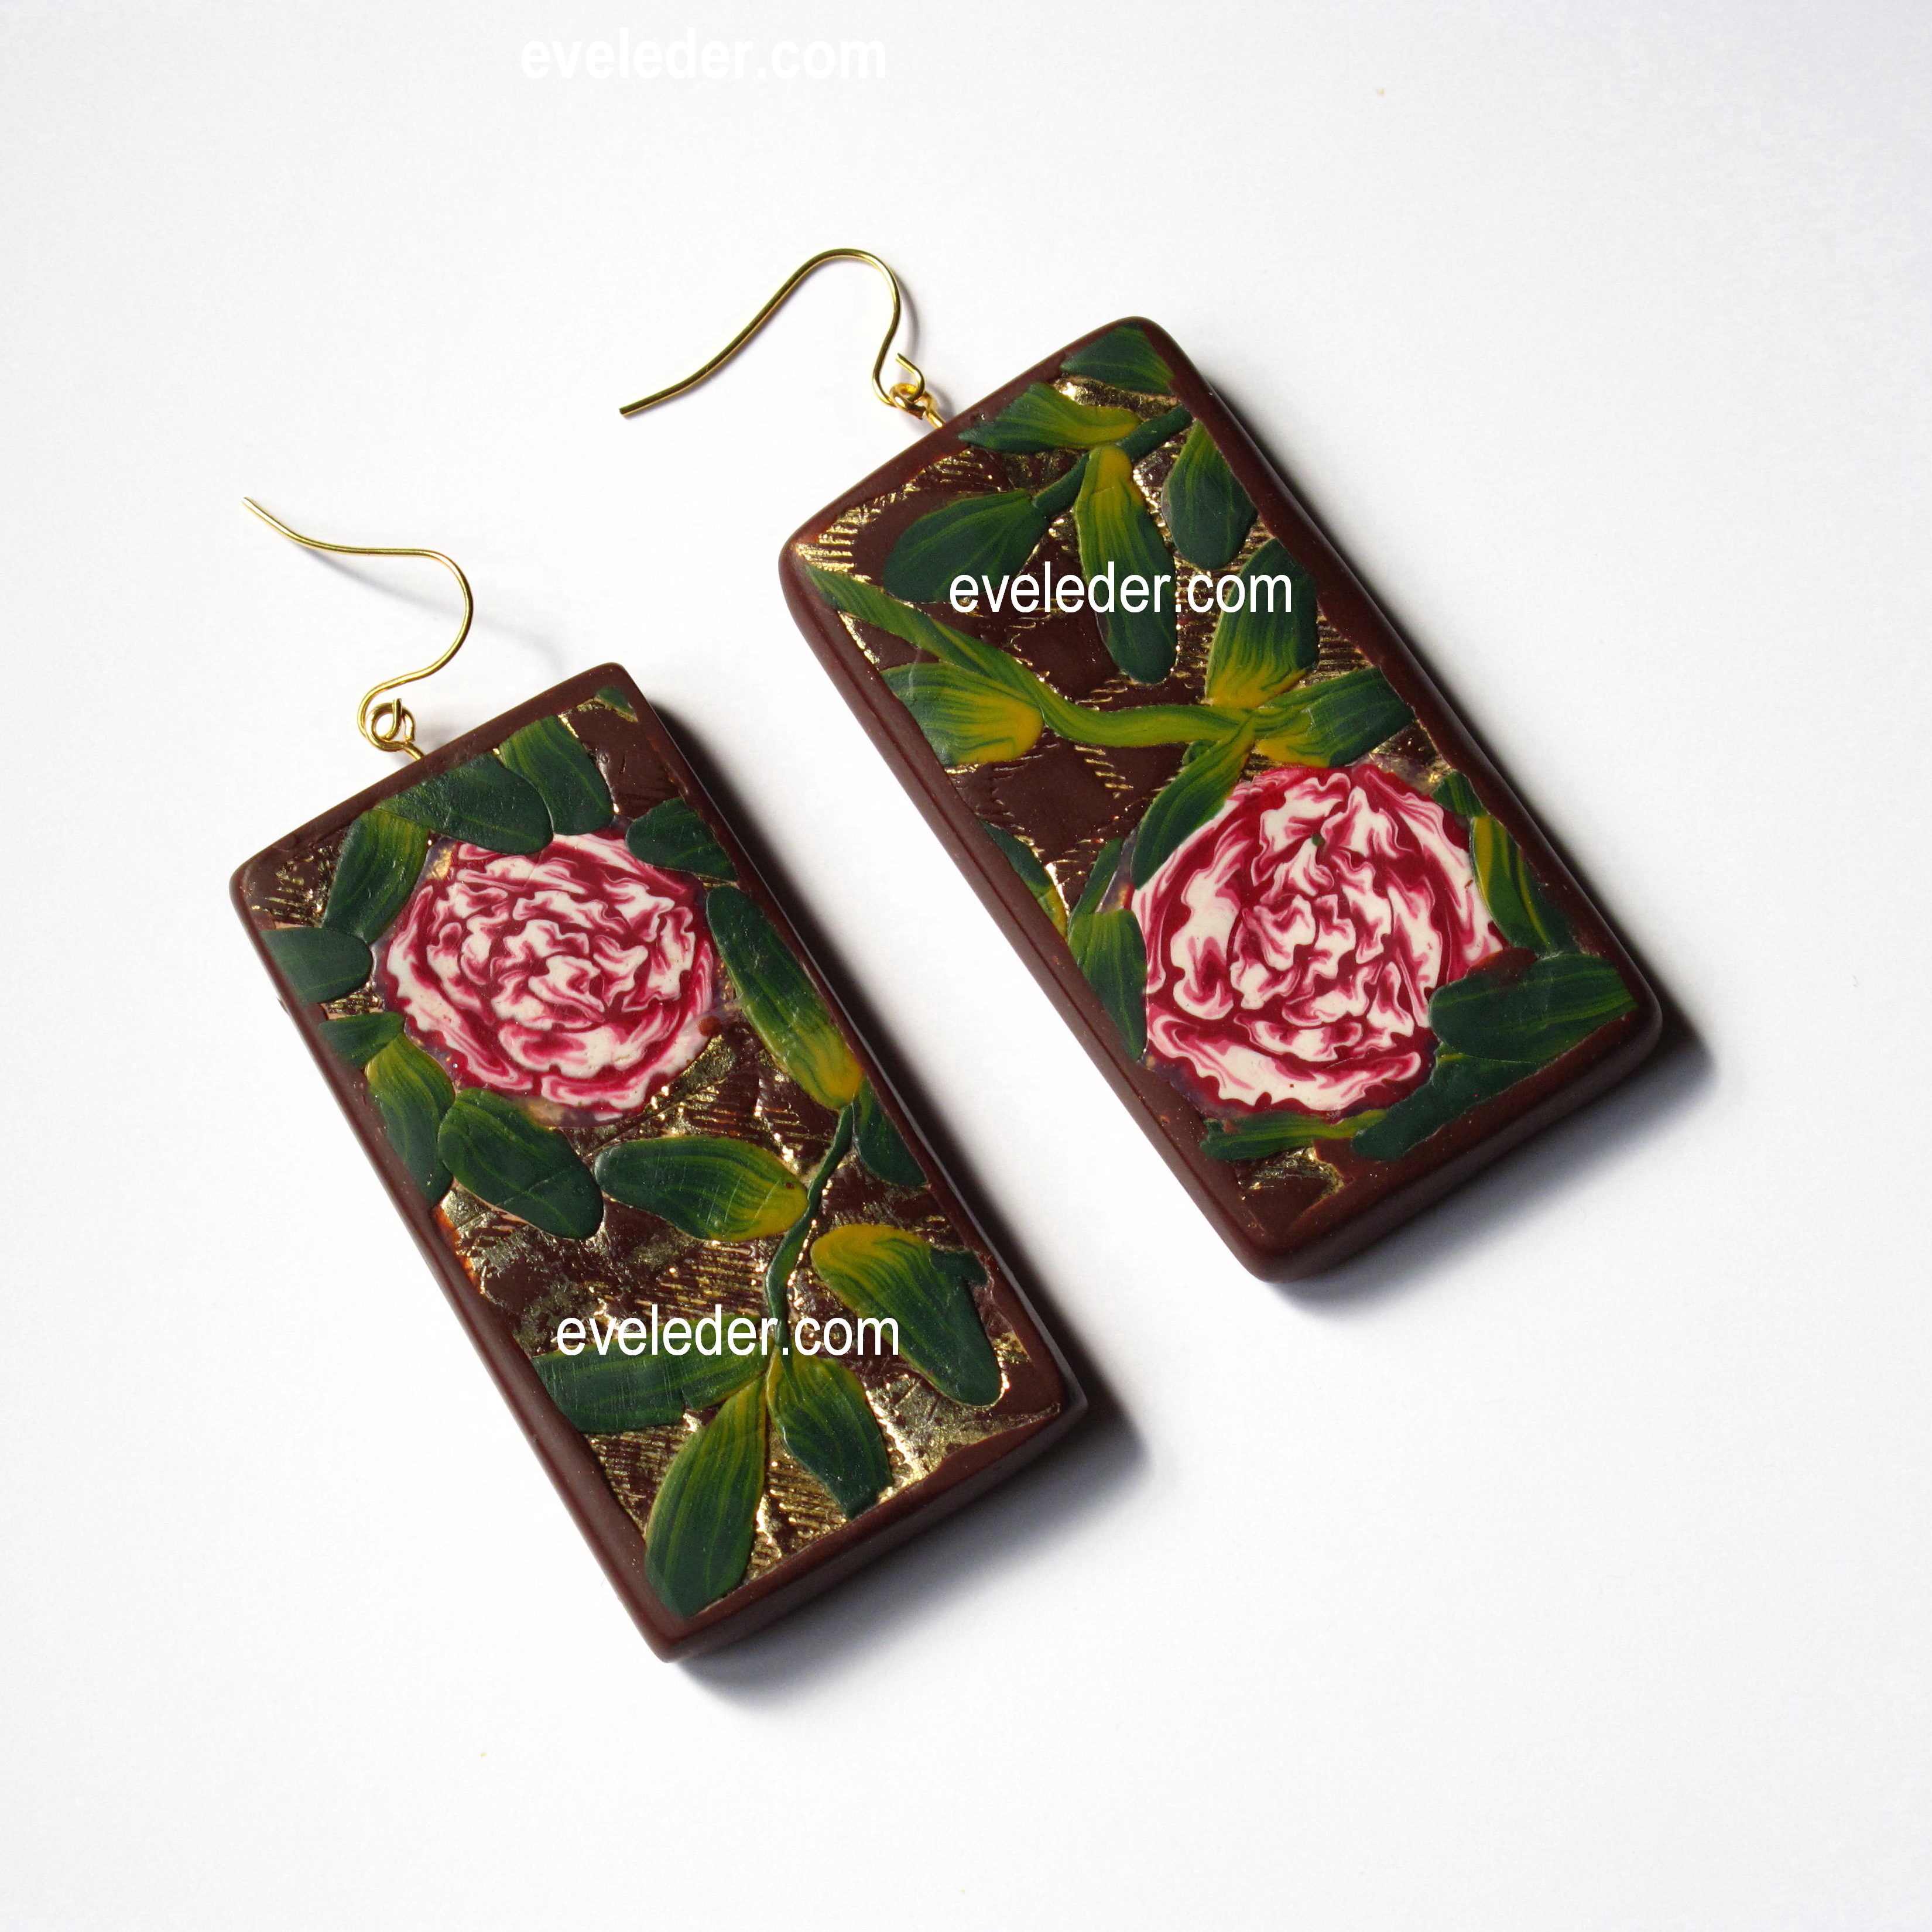 Polymer clay peony earrings floral polymer clay earrings dangle flower earrings dangle polymer clay earrings dangle peony earrings